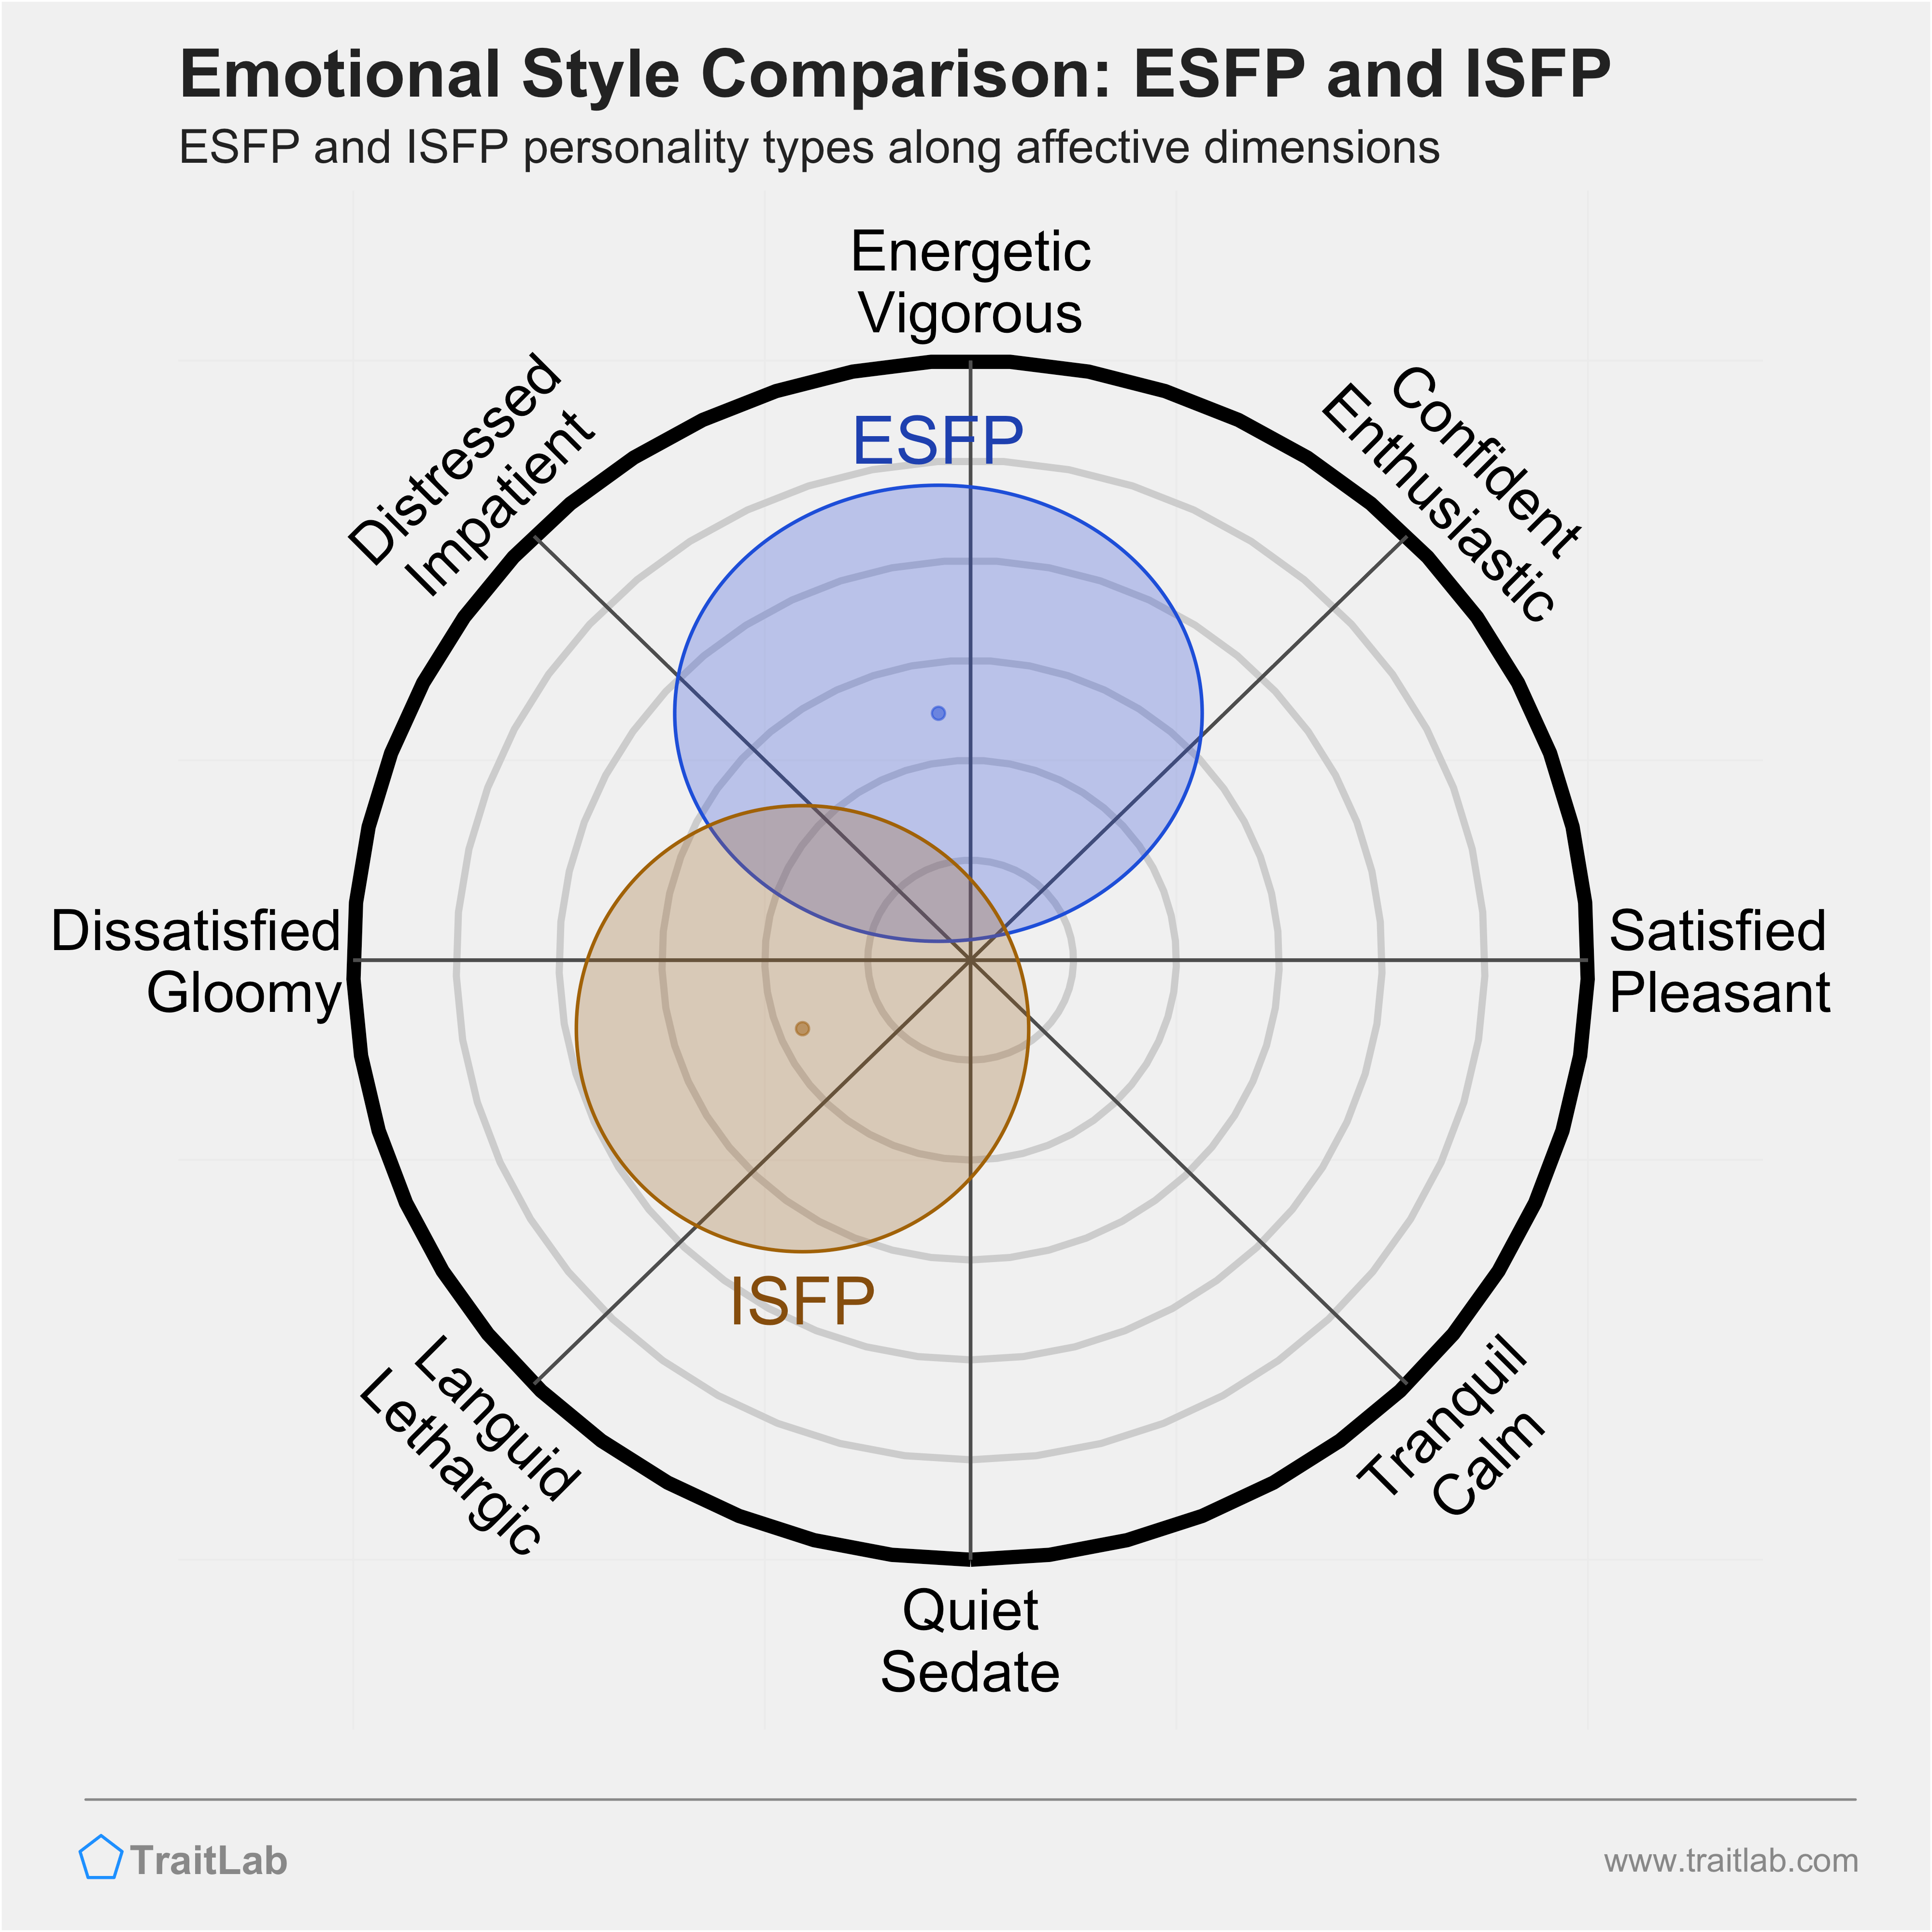 ESFP and ISFP comparison across emotional (affective) dimensions